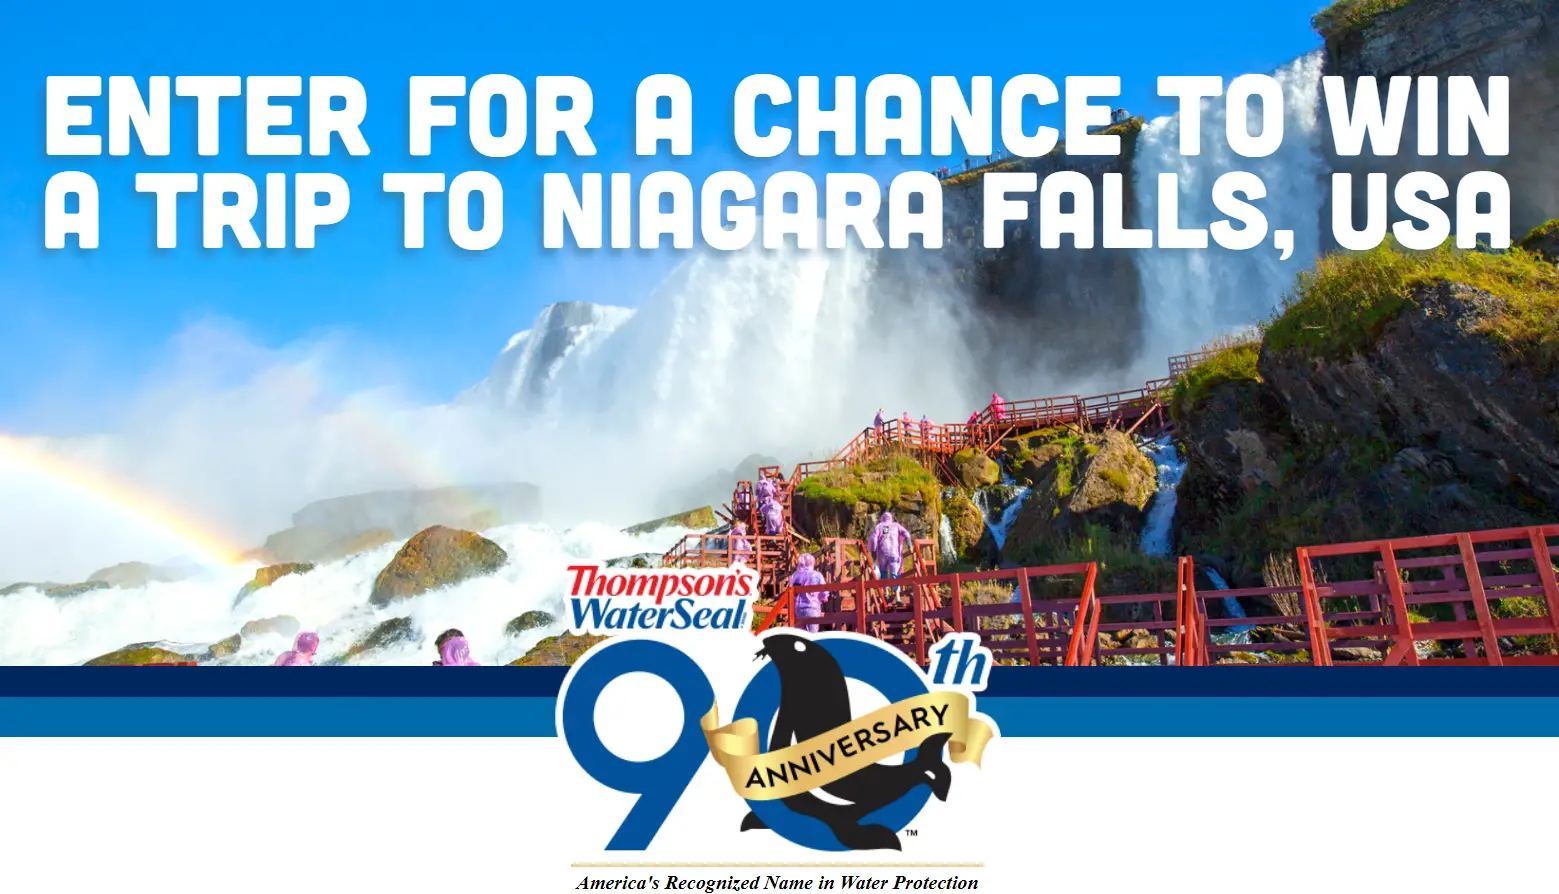 Enter Thompson’s WaterSeal 90th Anniversary Contest for your chance to win a trip for four to Niagara Falls, New York or a weekly $500 gift card prize